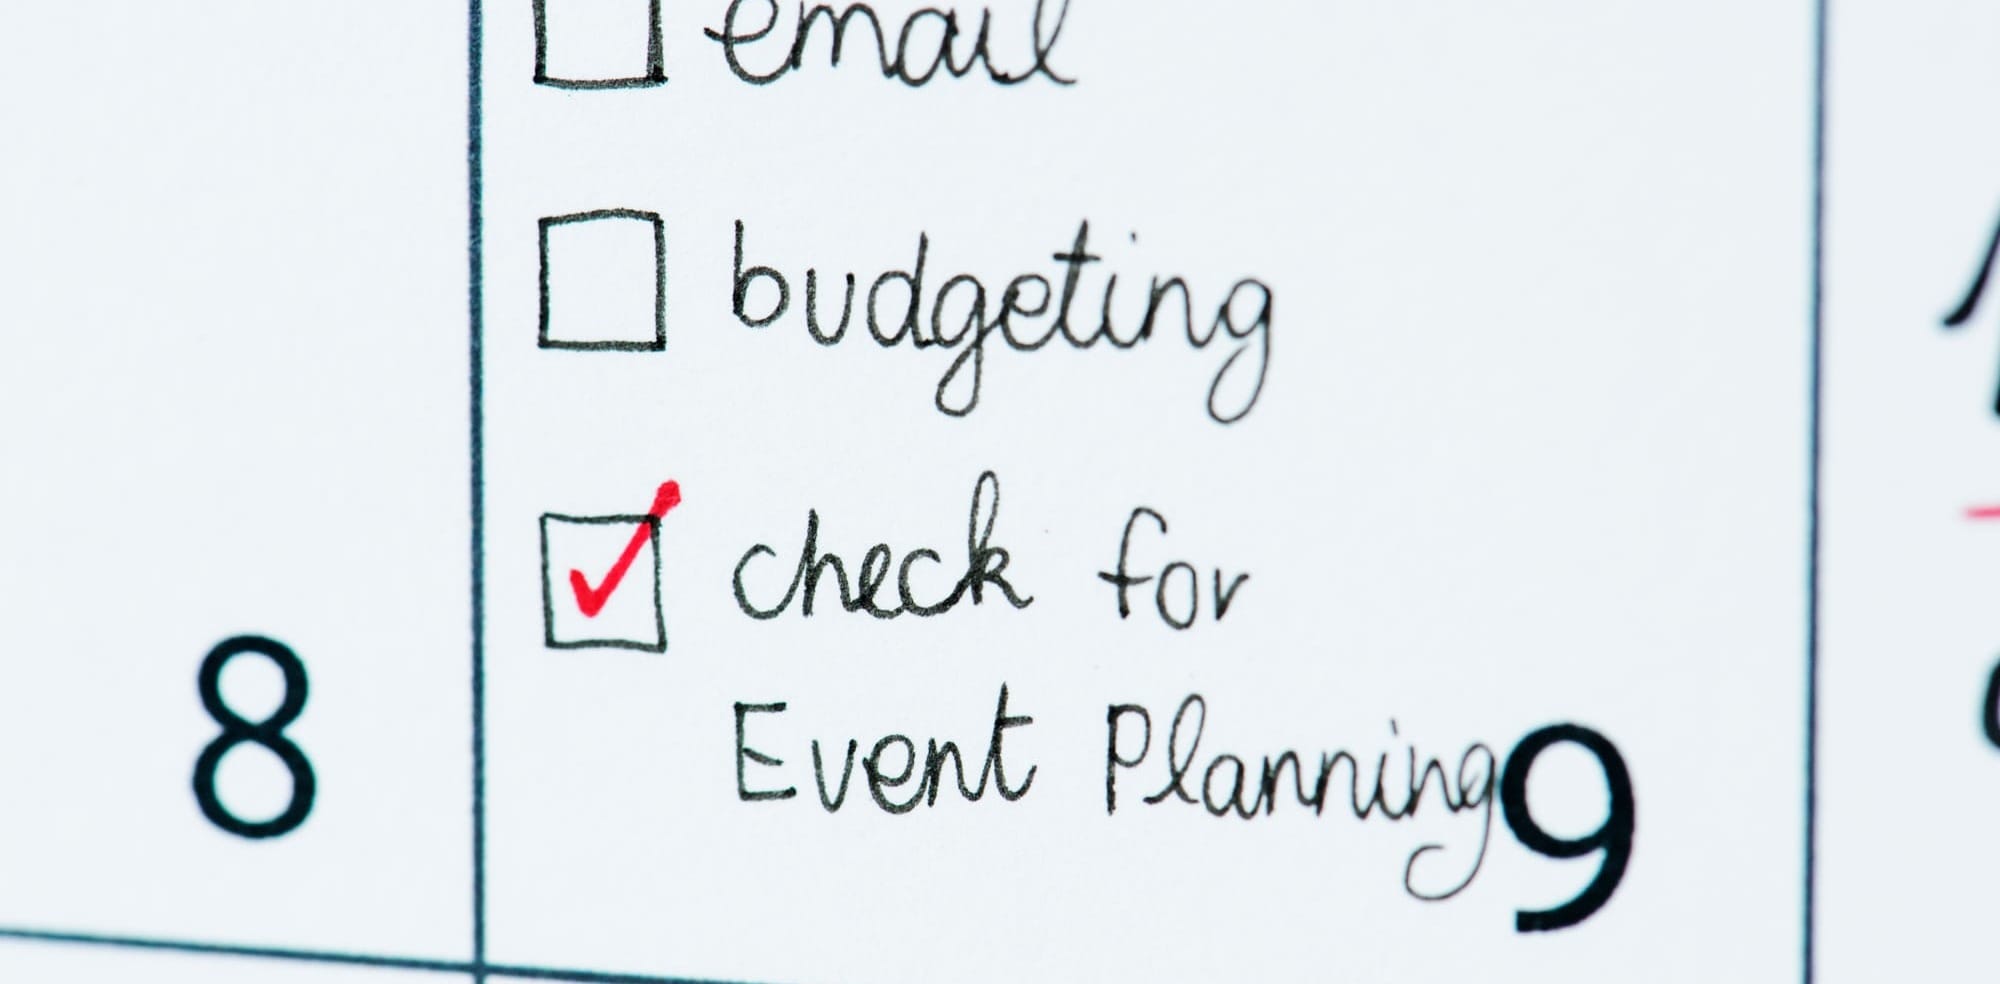 Calendar date block with checklist saying "check for event planning"